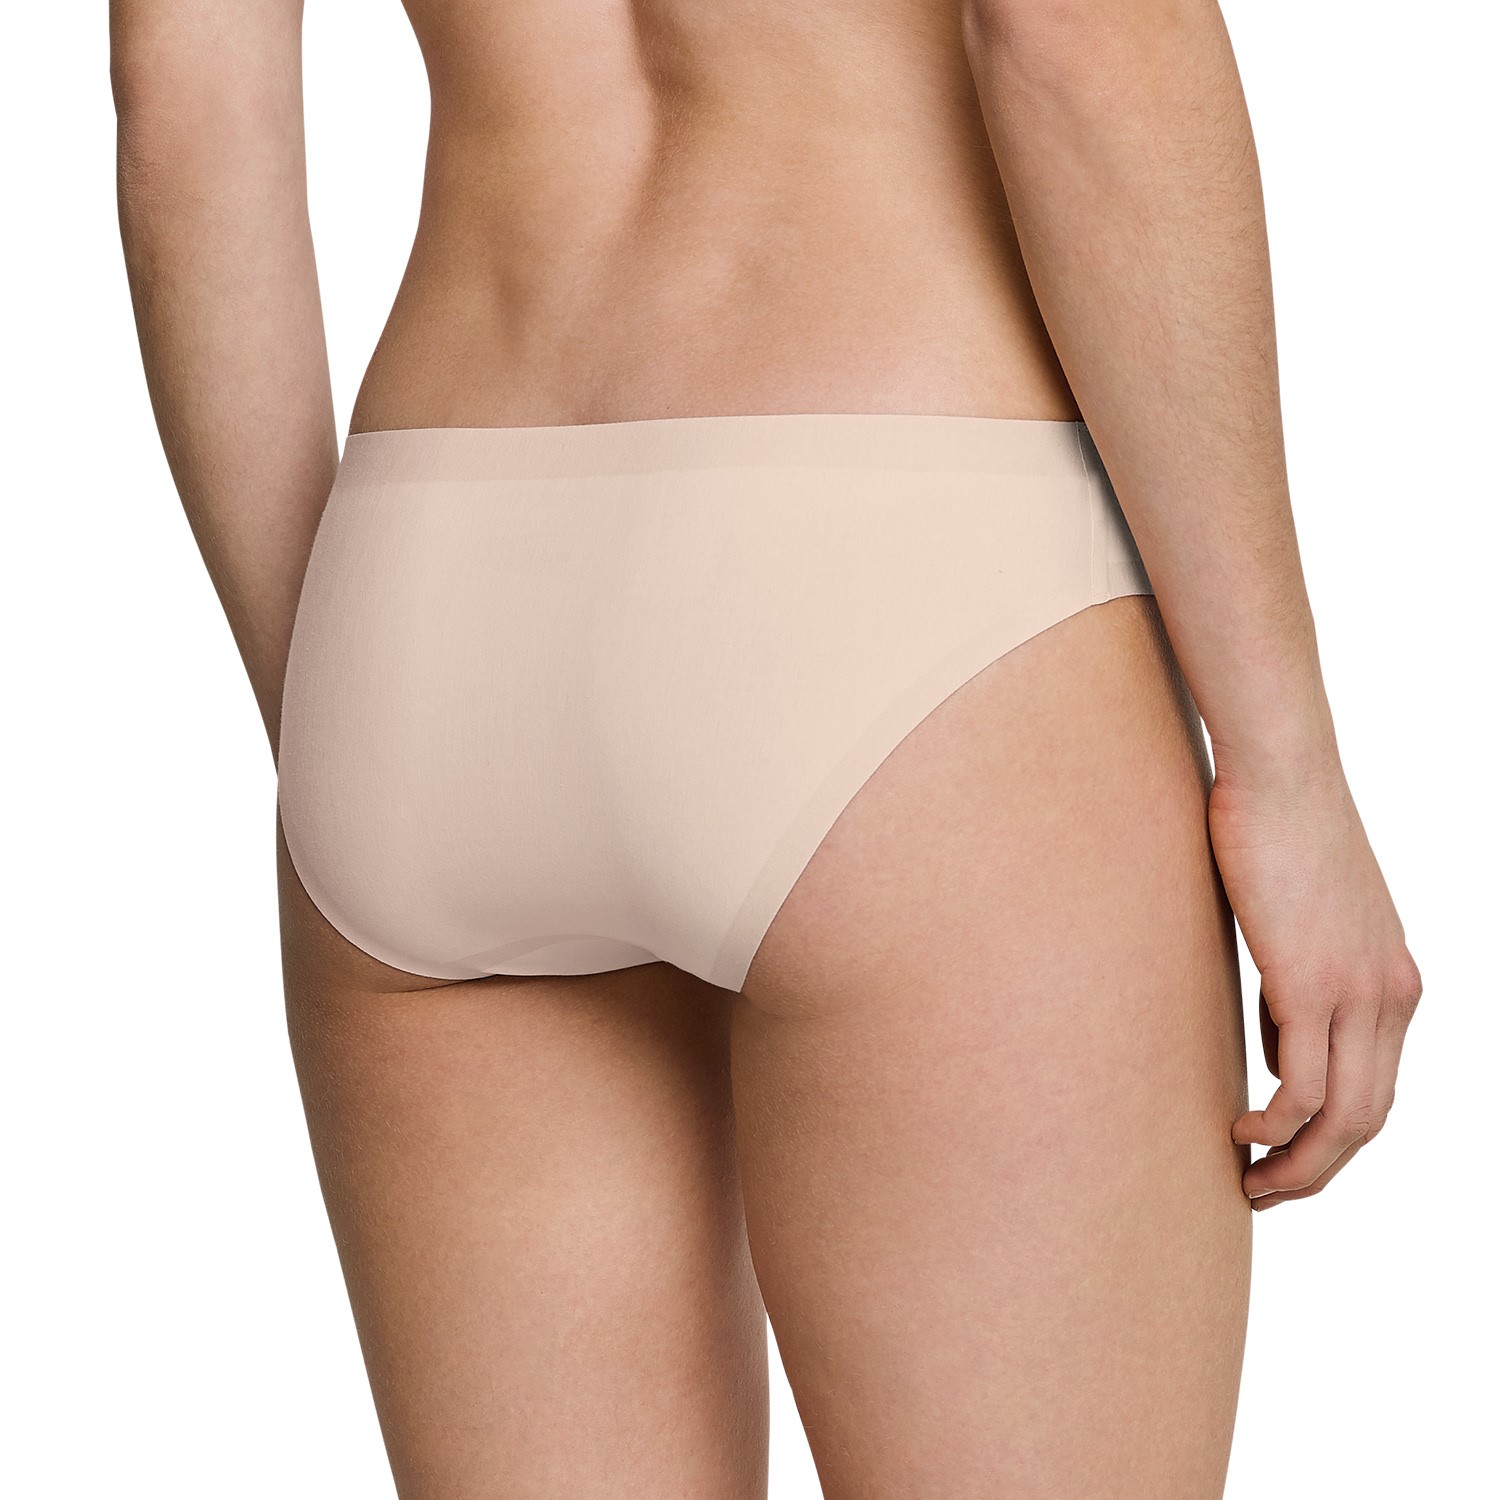 Women's panty brief Schiesser Invisible Soft -nude -20%